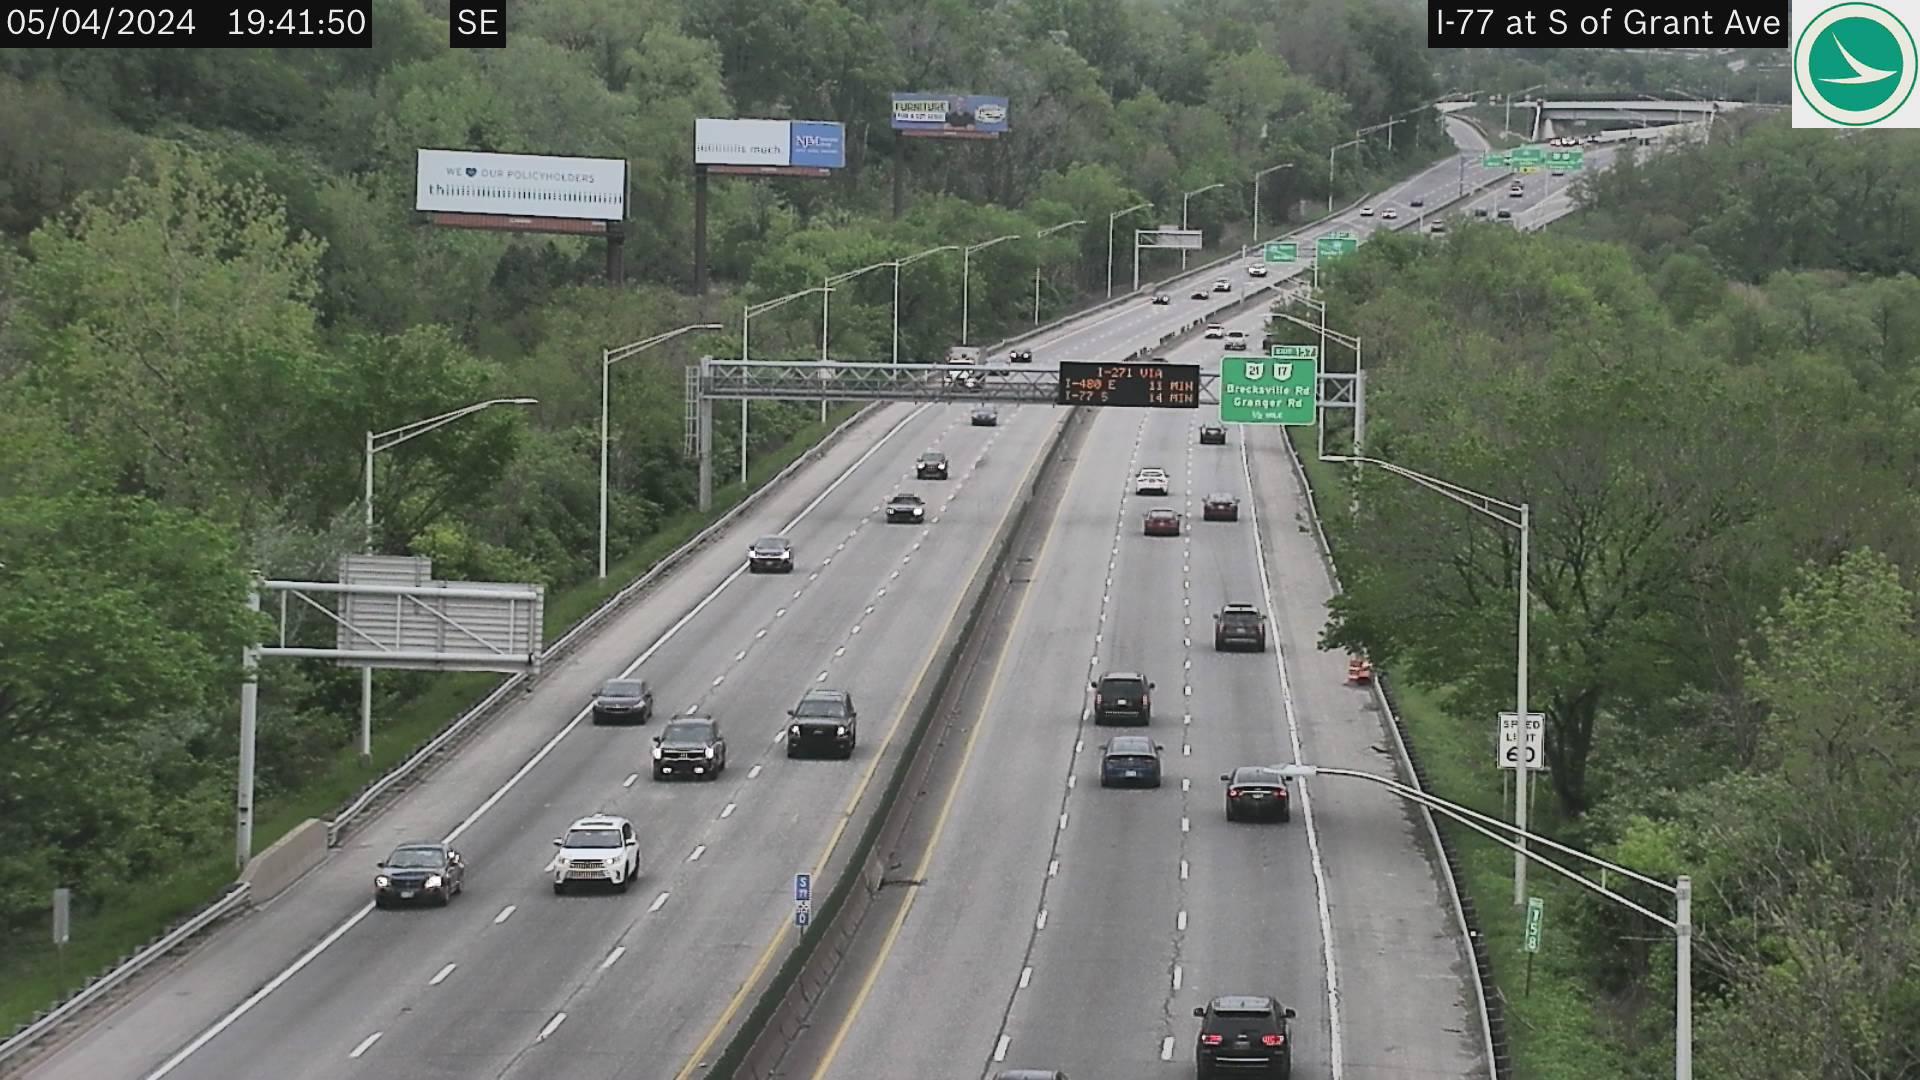 Traffic Cam Cuyahoga Heights: I-77 at S of Grant Ave Player